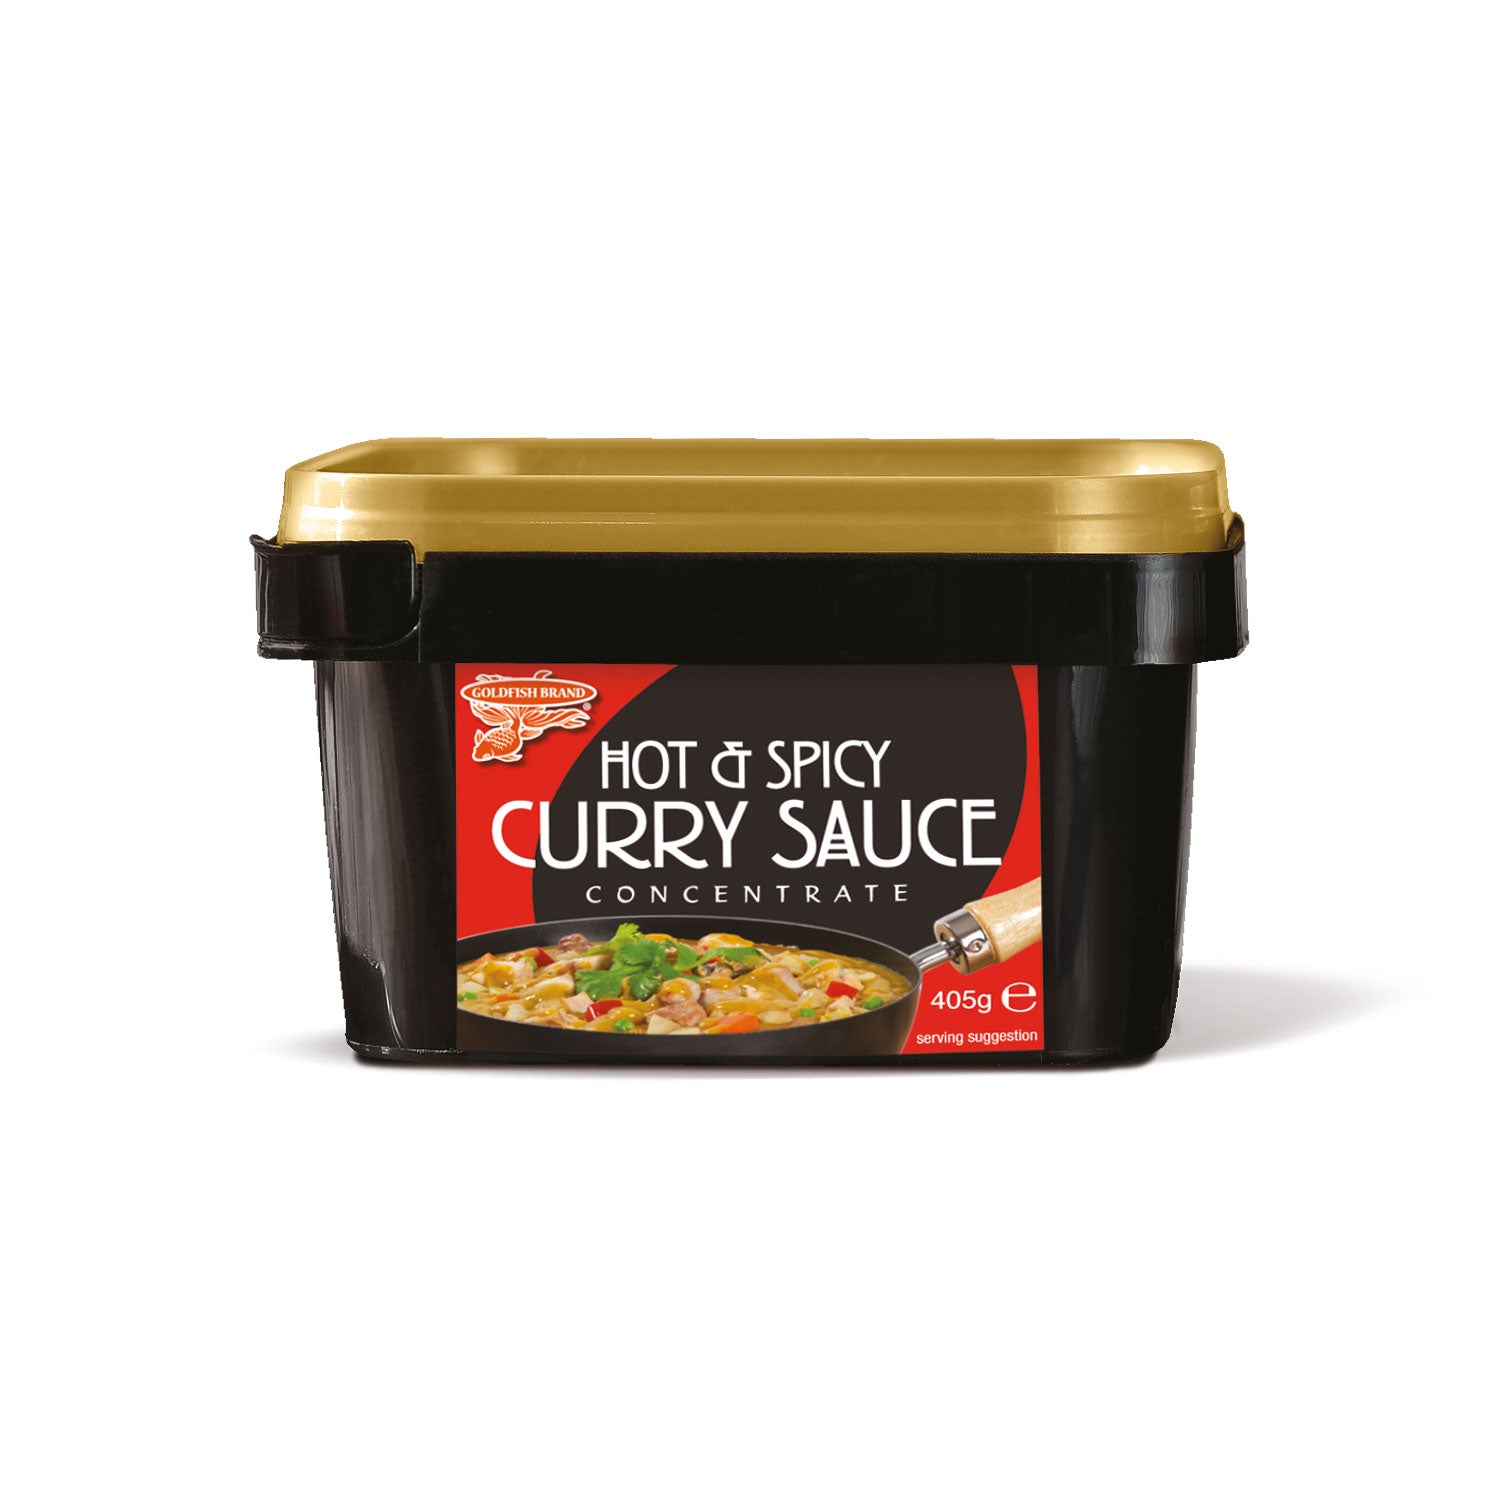 Hot and Spicy Curry Sauce Concentrate 405g by Goldfish